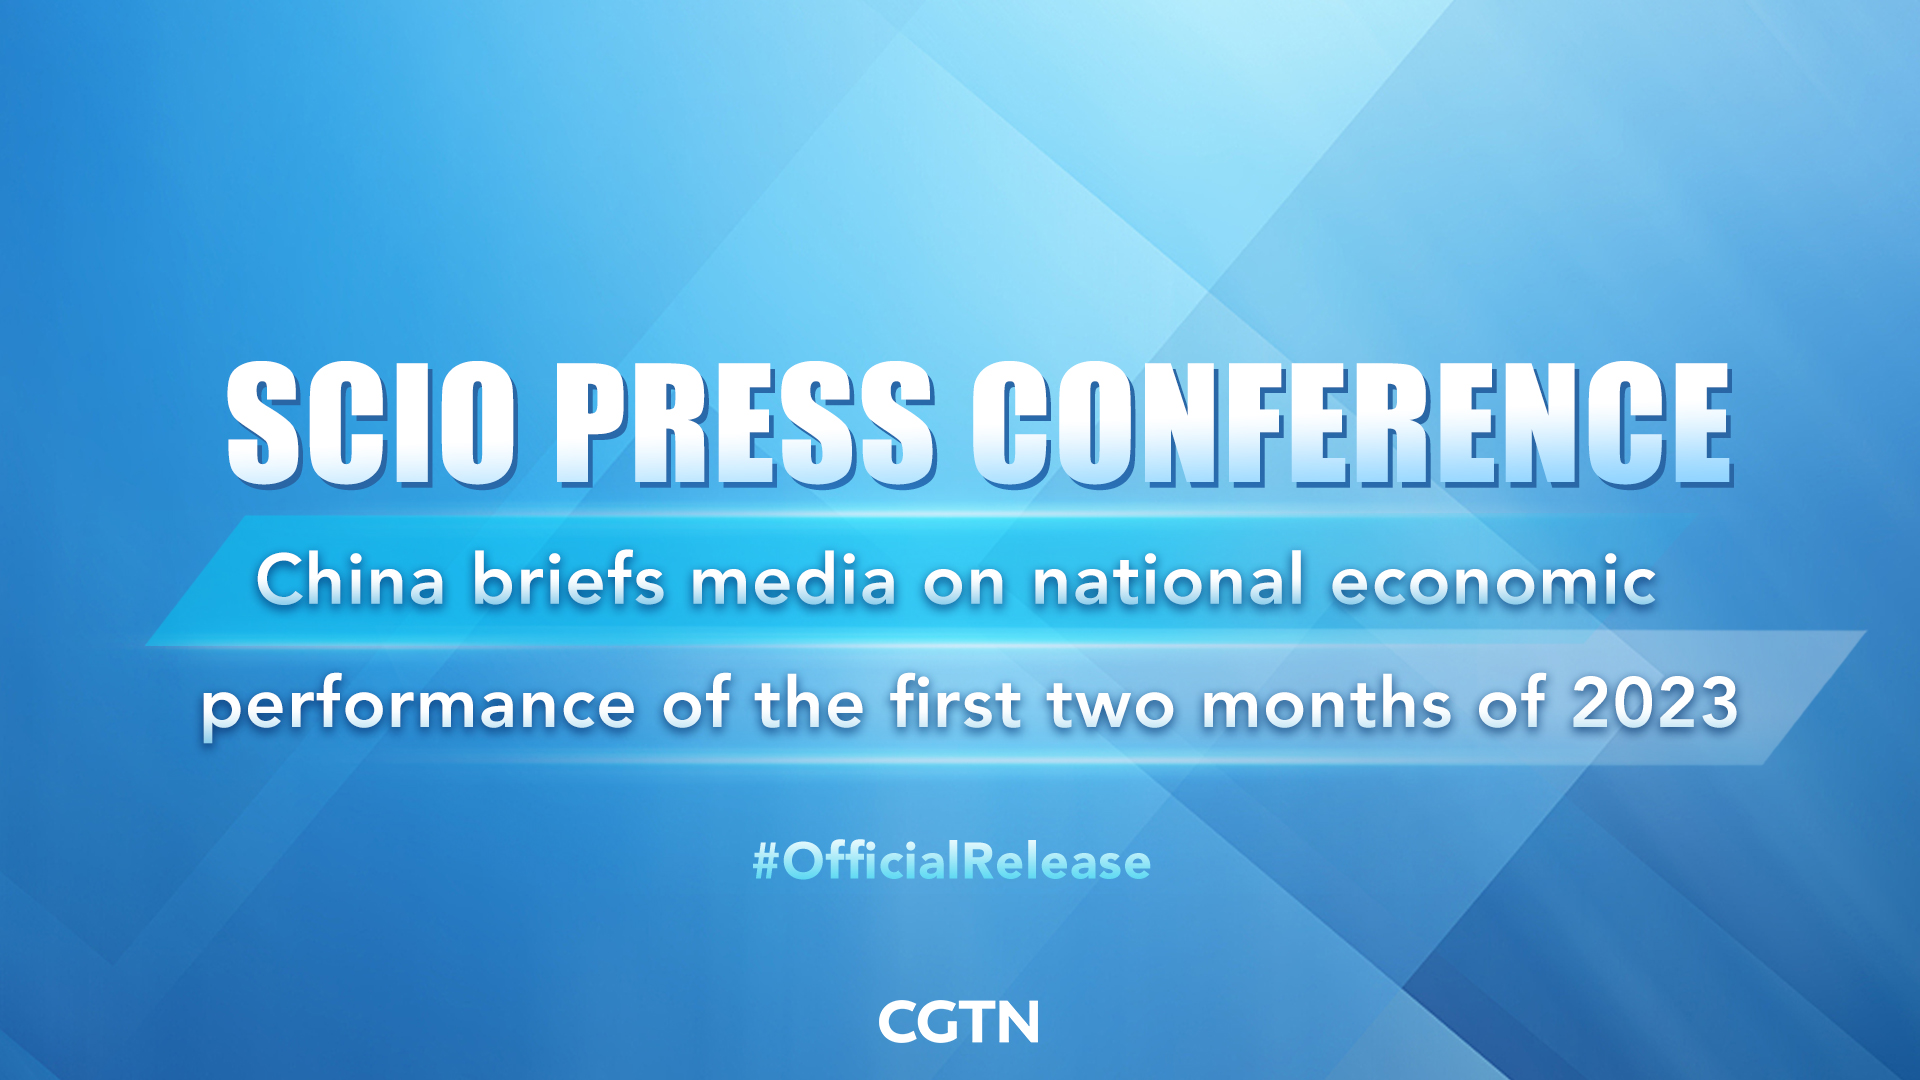 Live: China briefs media on national economic performance in first two months of 2023